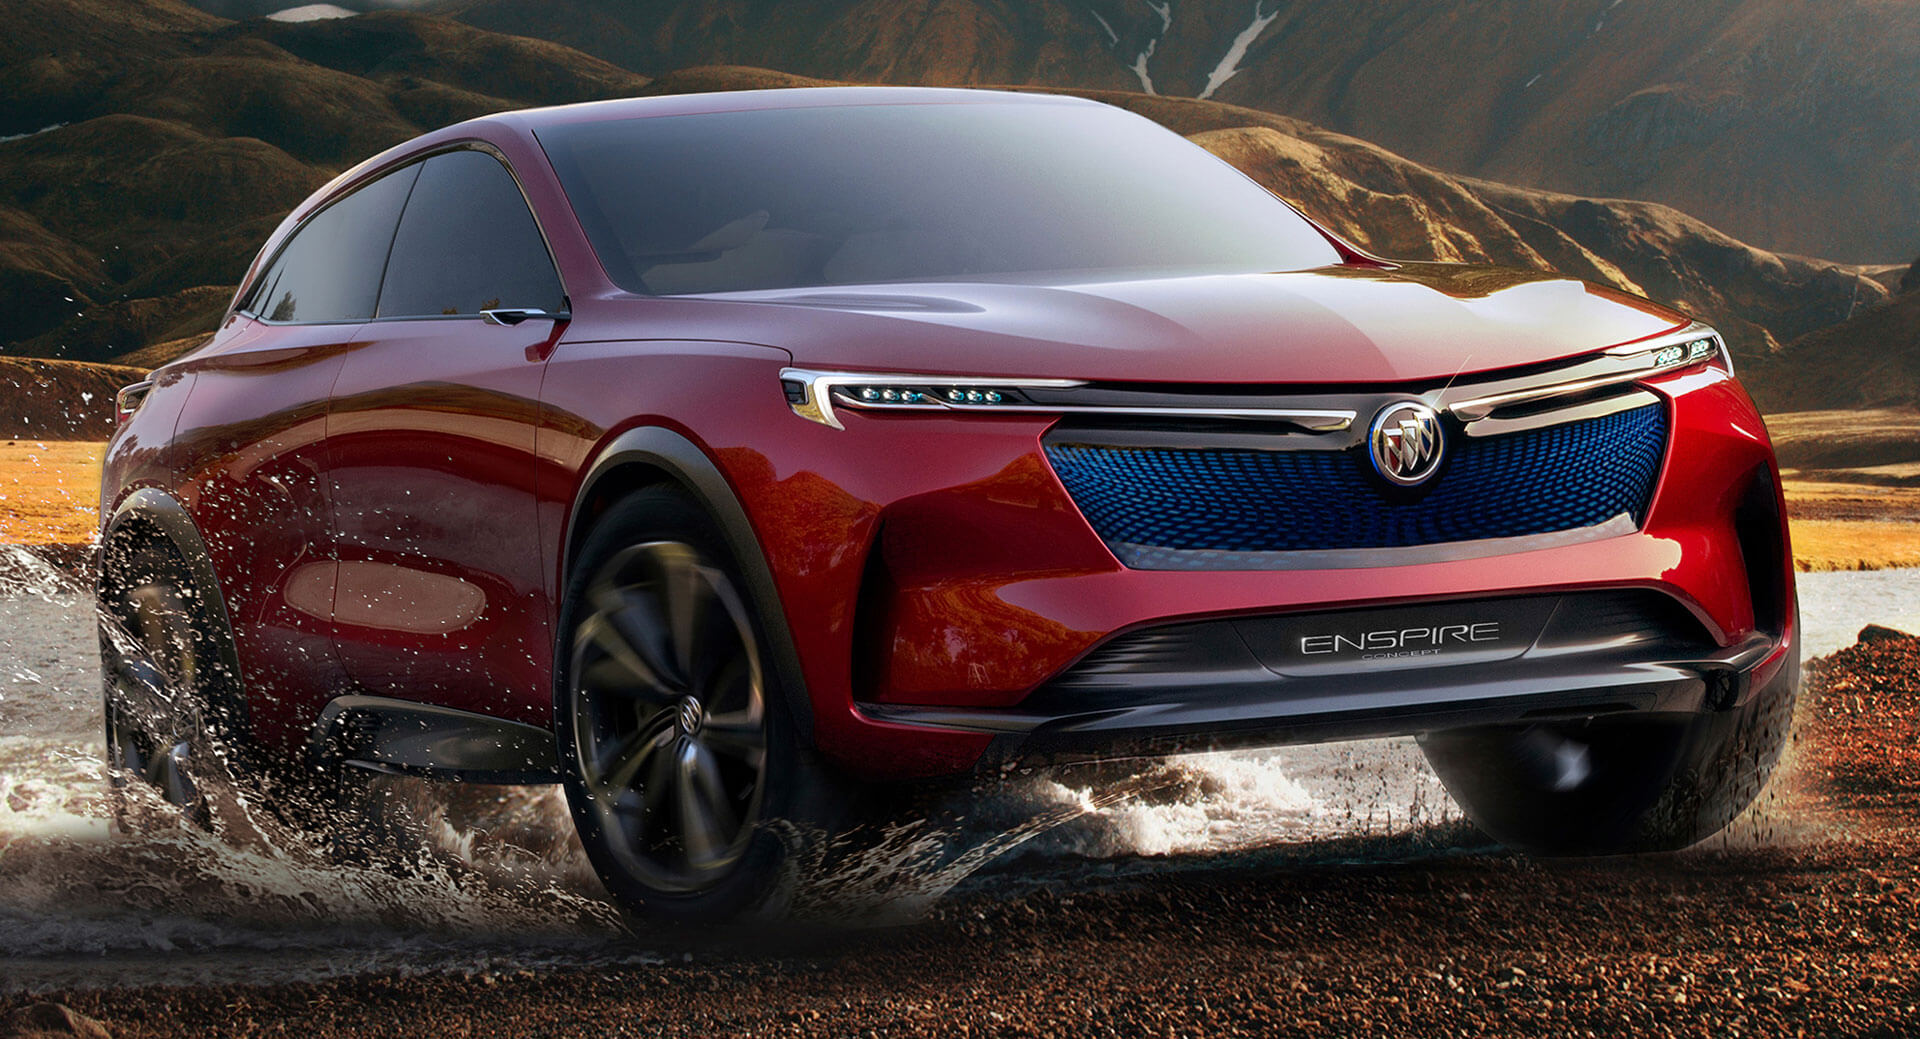 GM Trademarks Enspire Name; Is A New Buick SUV Coming? | Carscoops